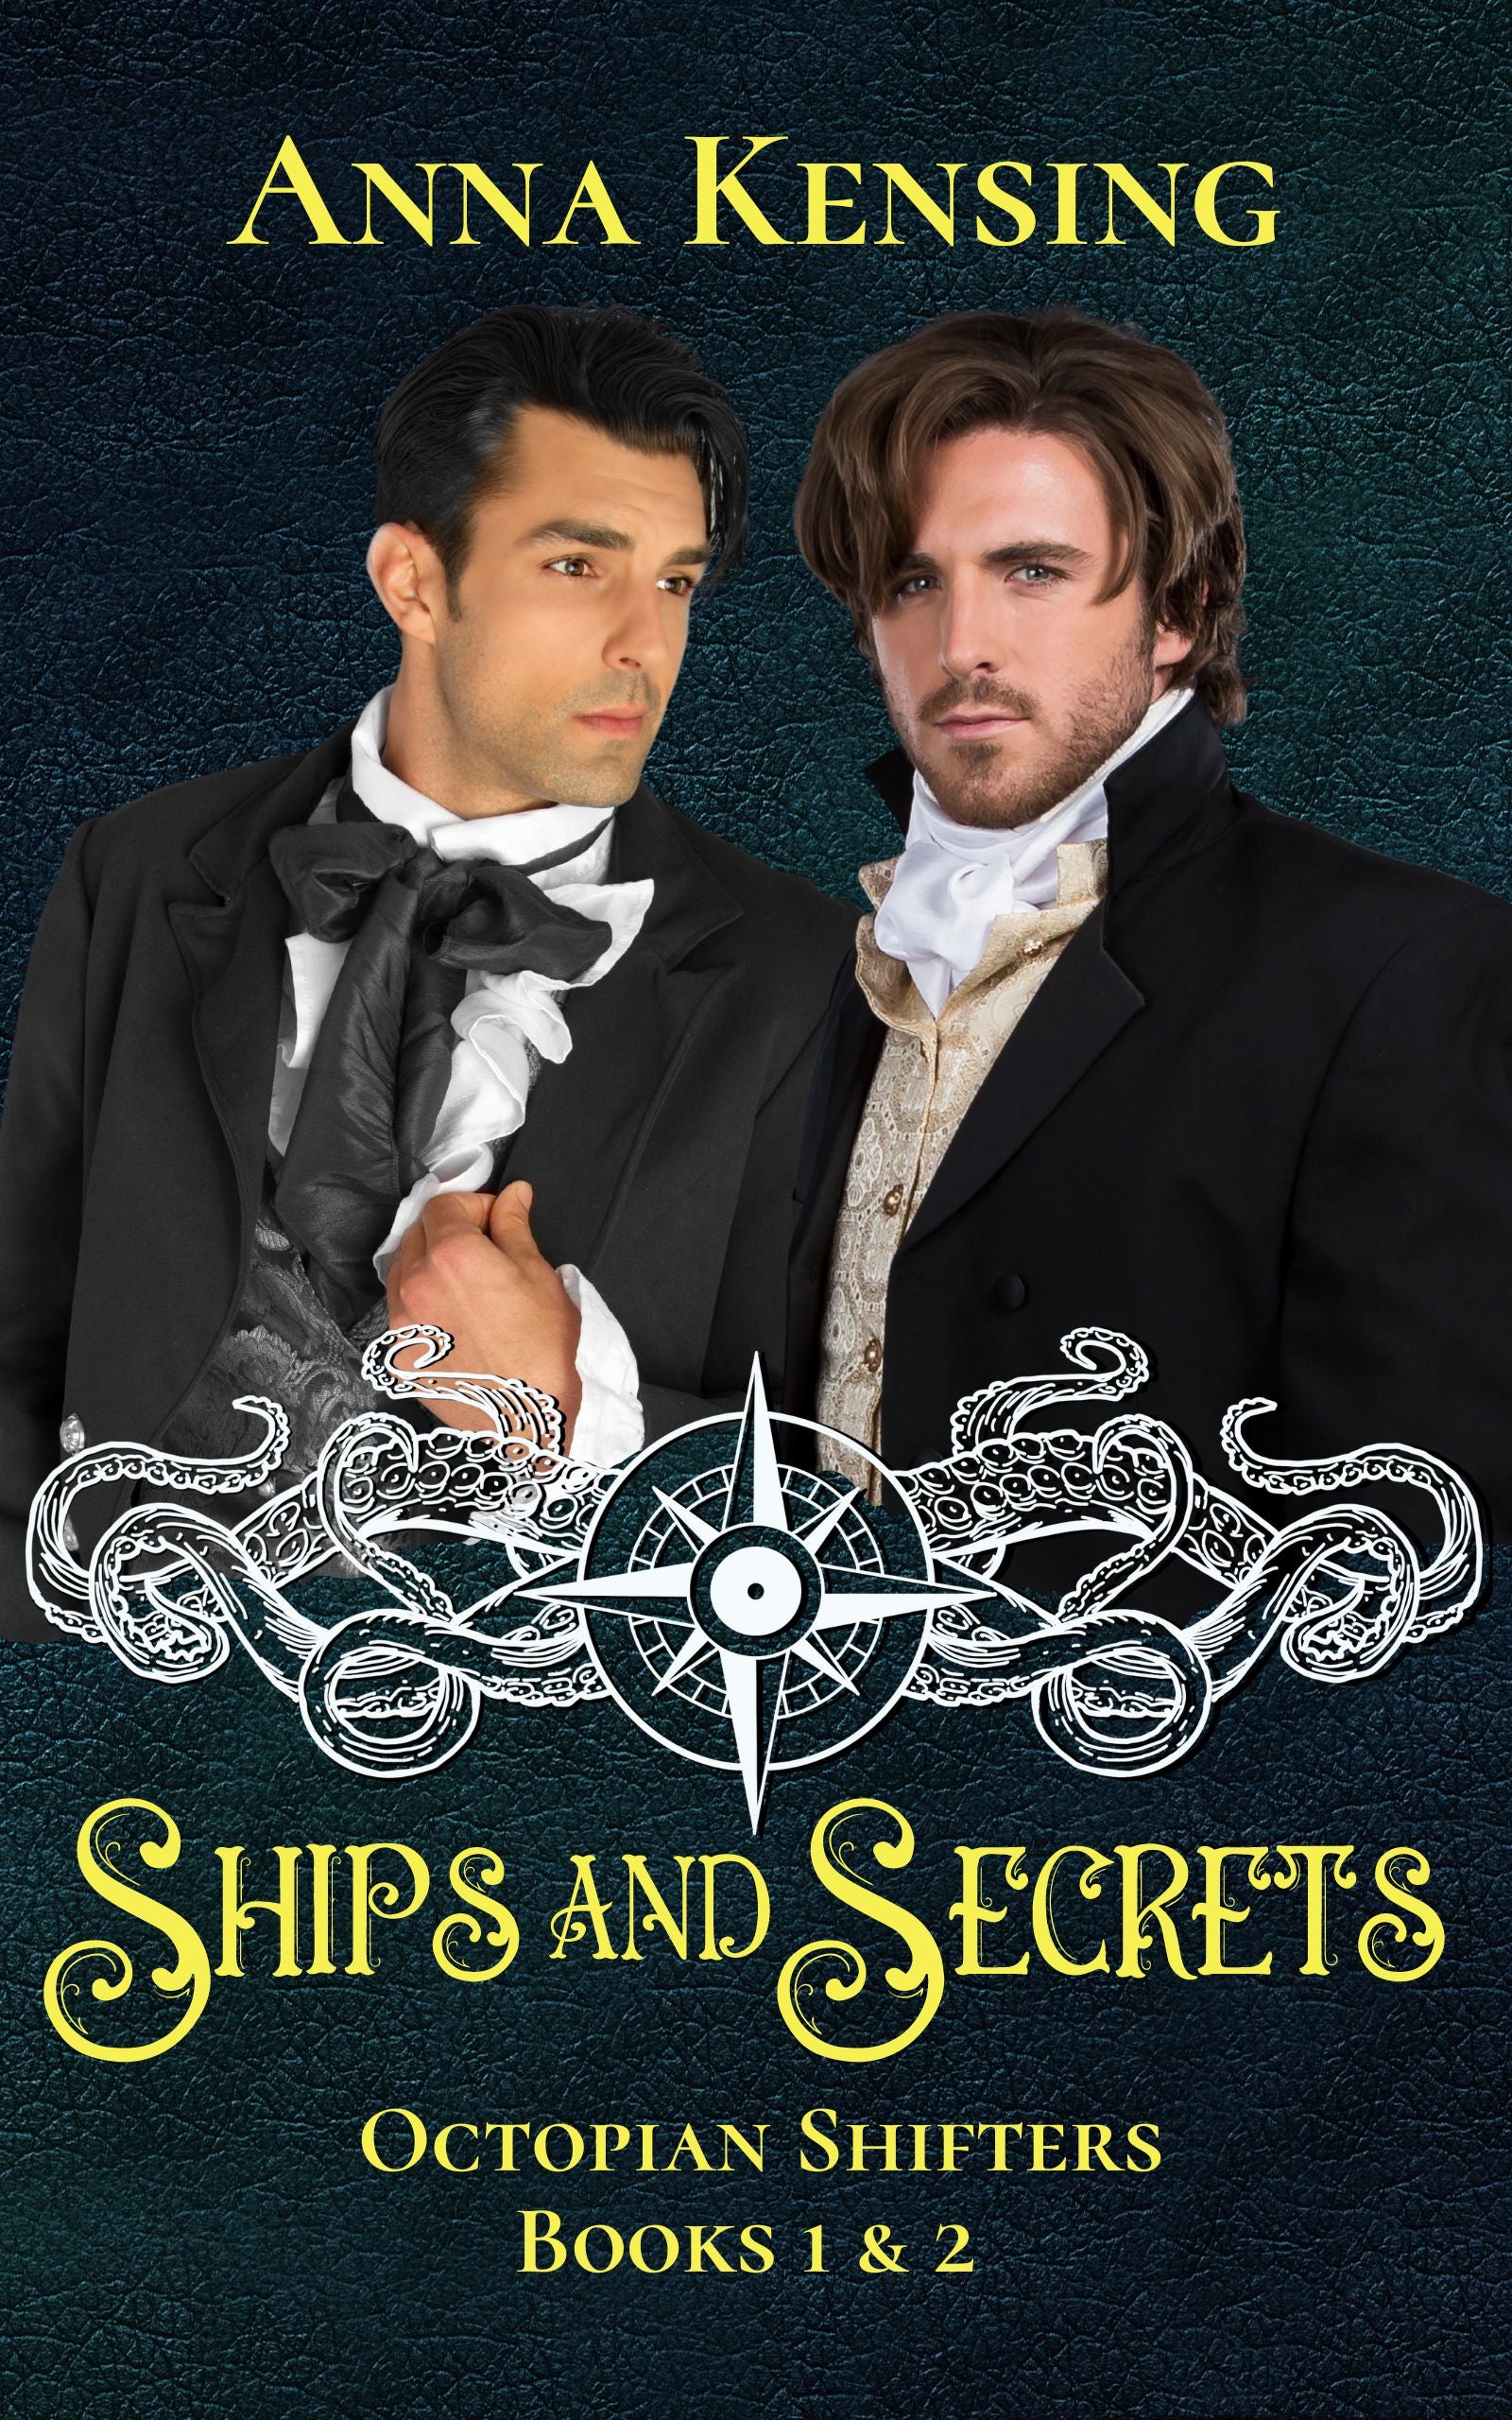 Cover for Ships and Secrets boxed set by Anna Kensing